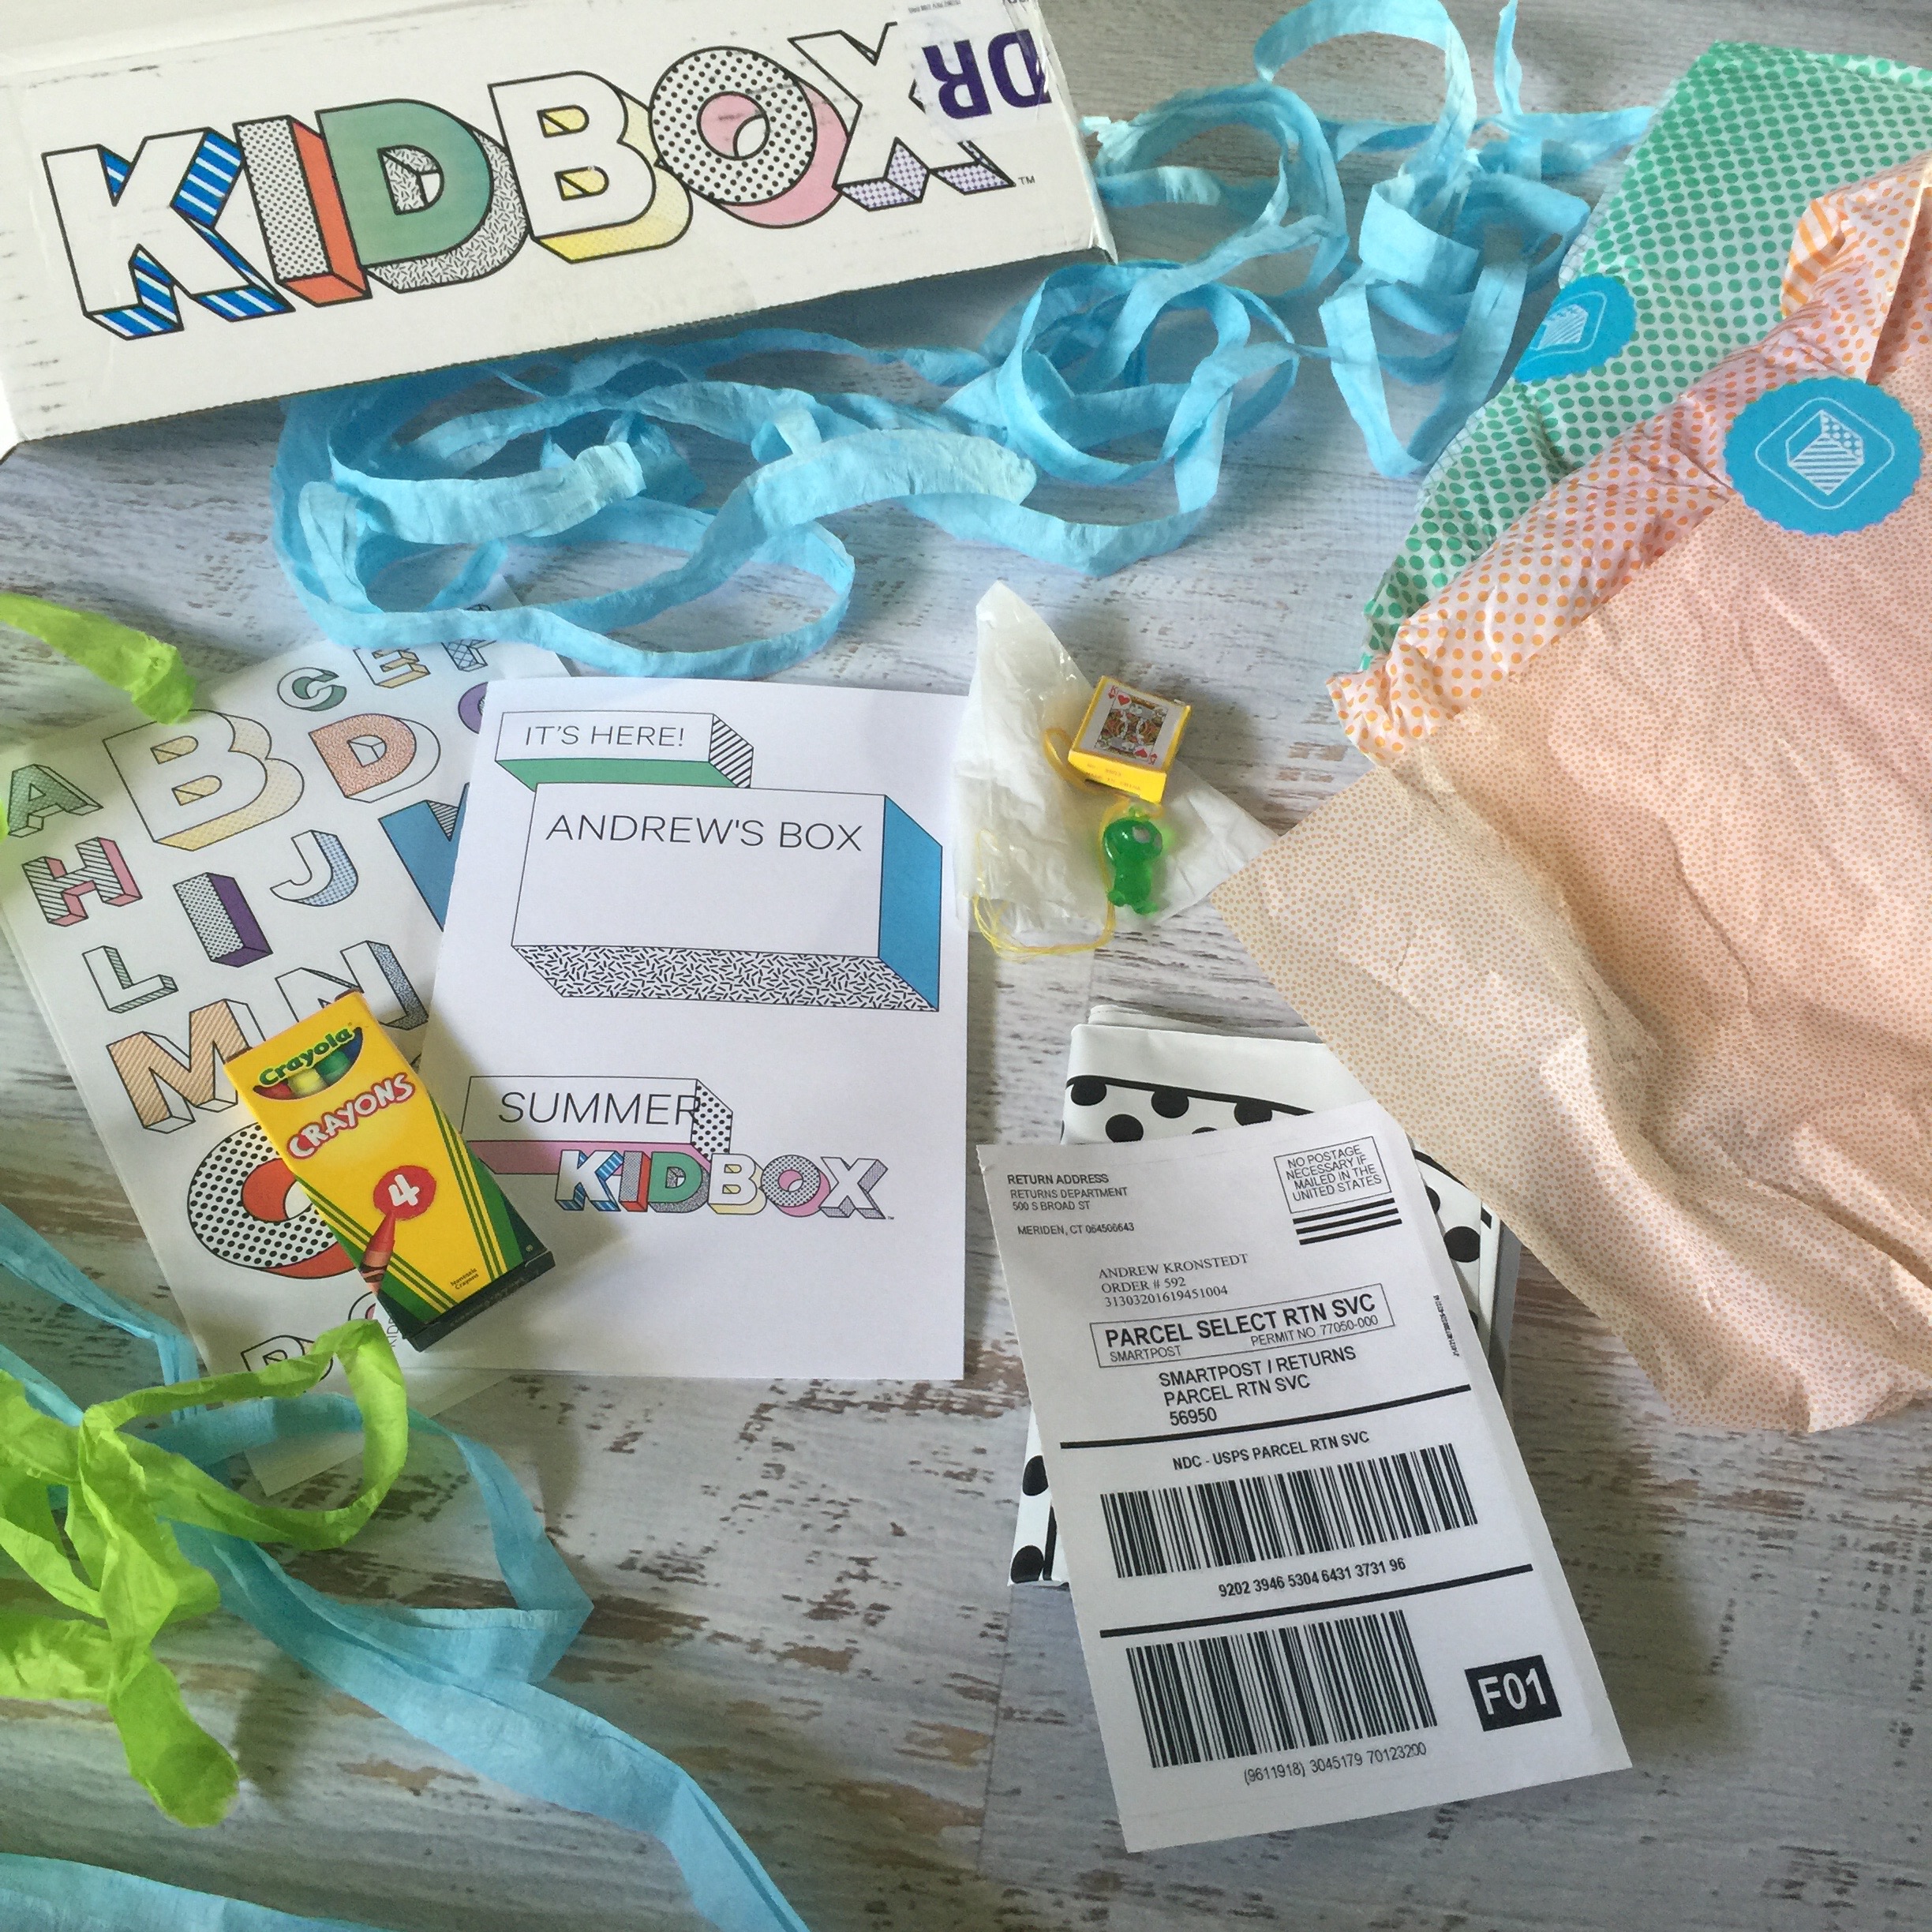 Kidbox: The New Kids’ Style Delivery Service #UnpackHappy